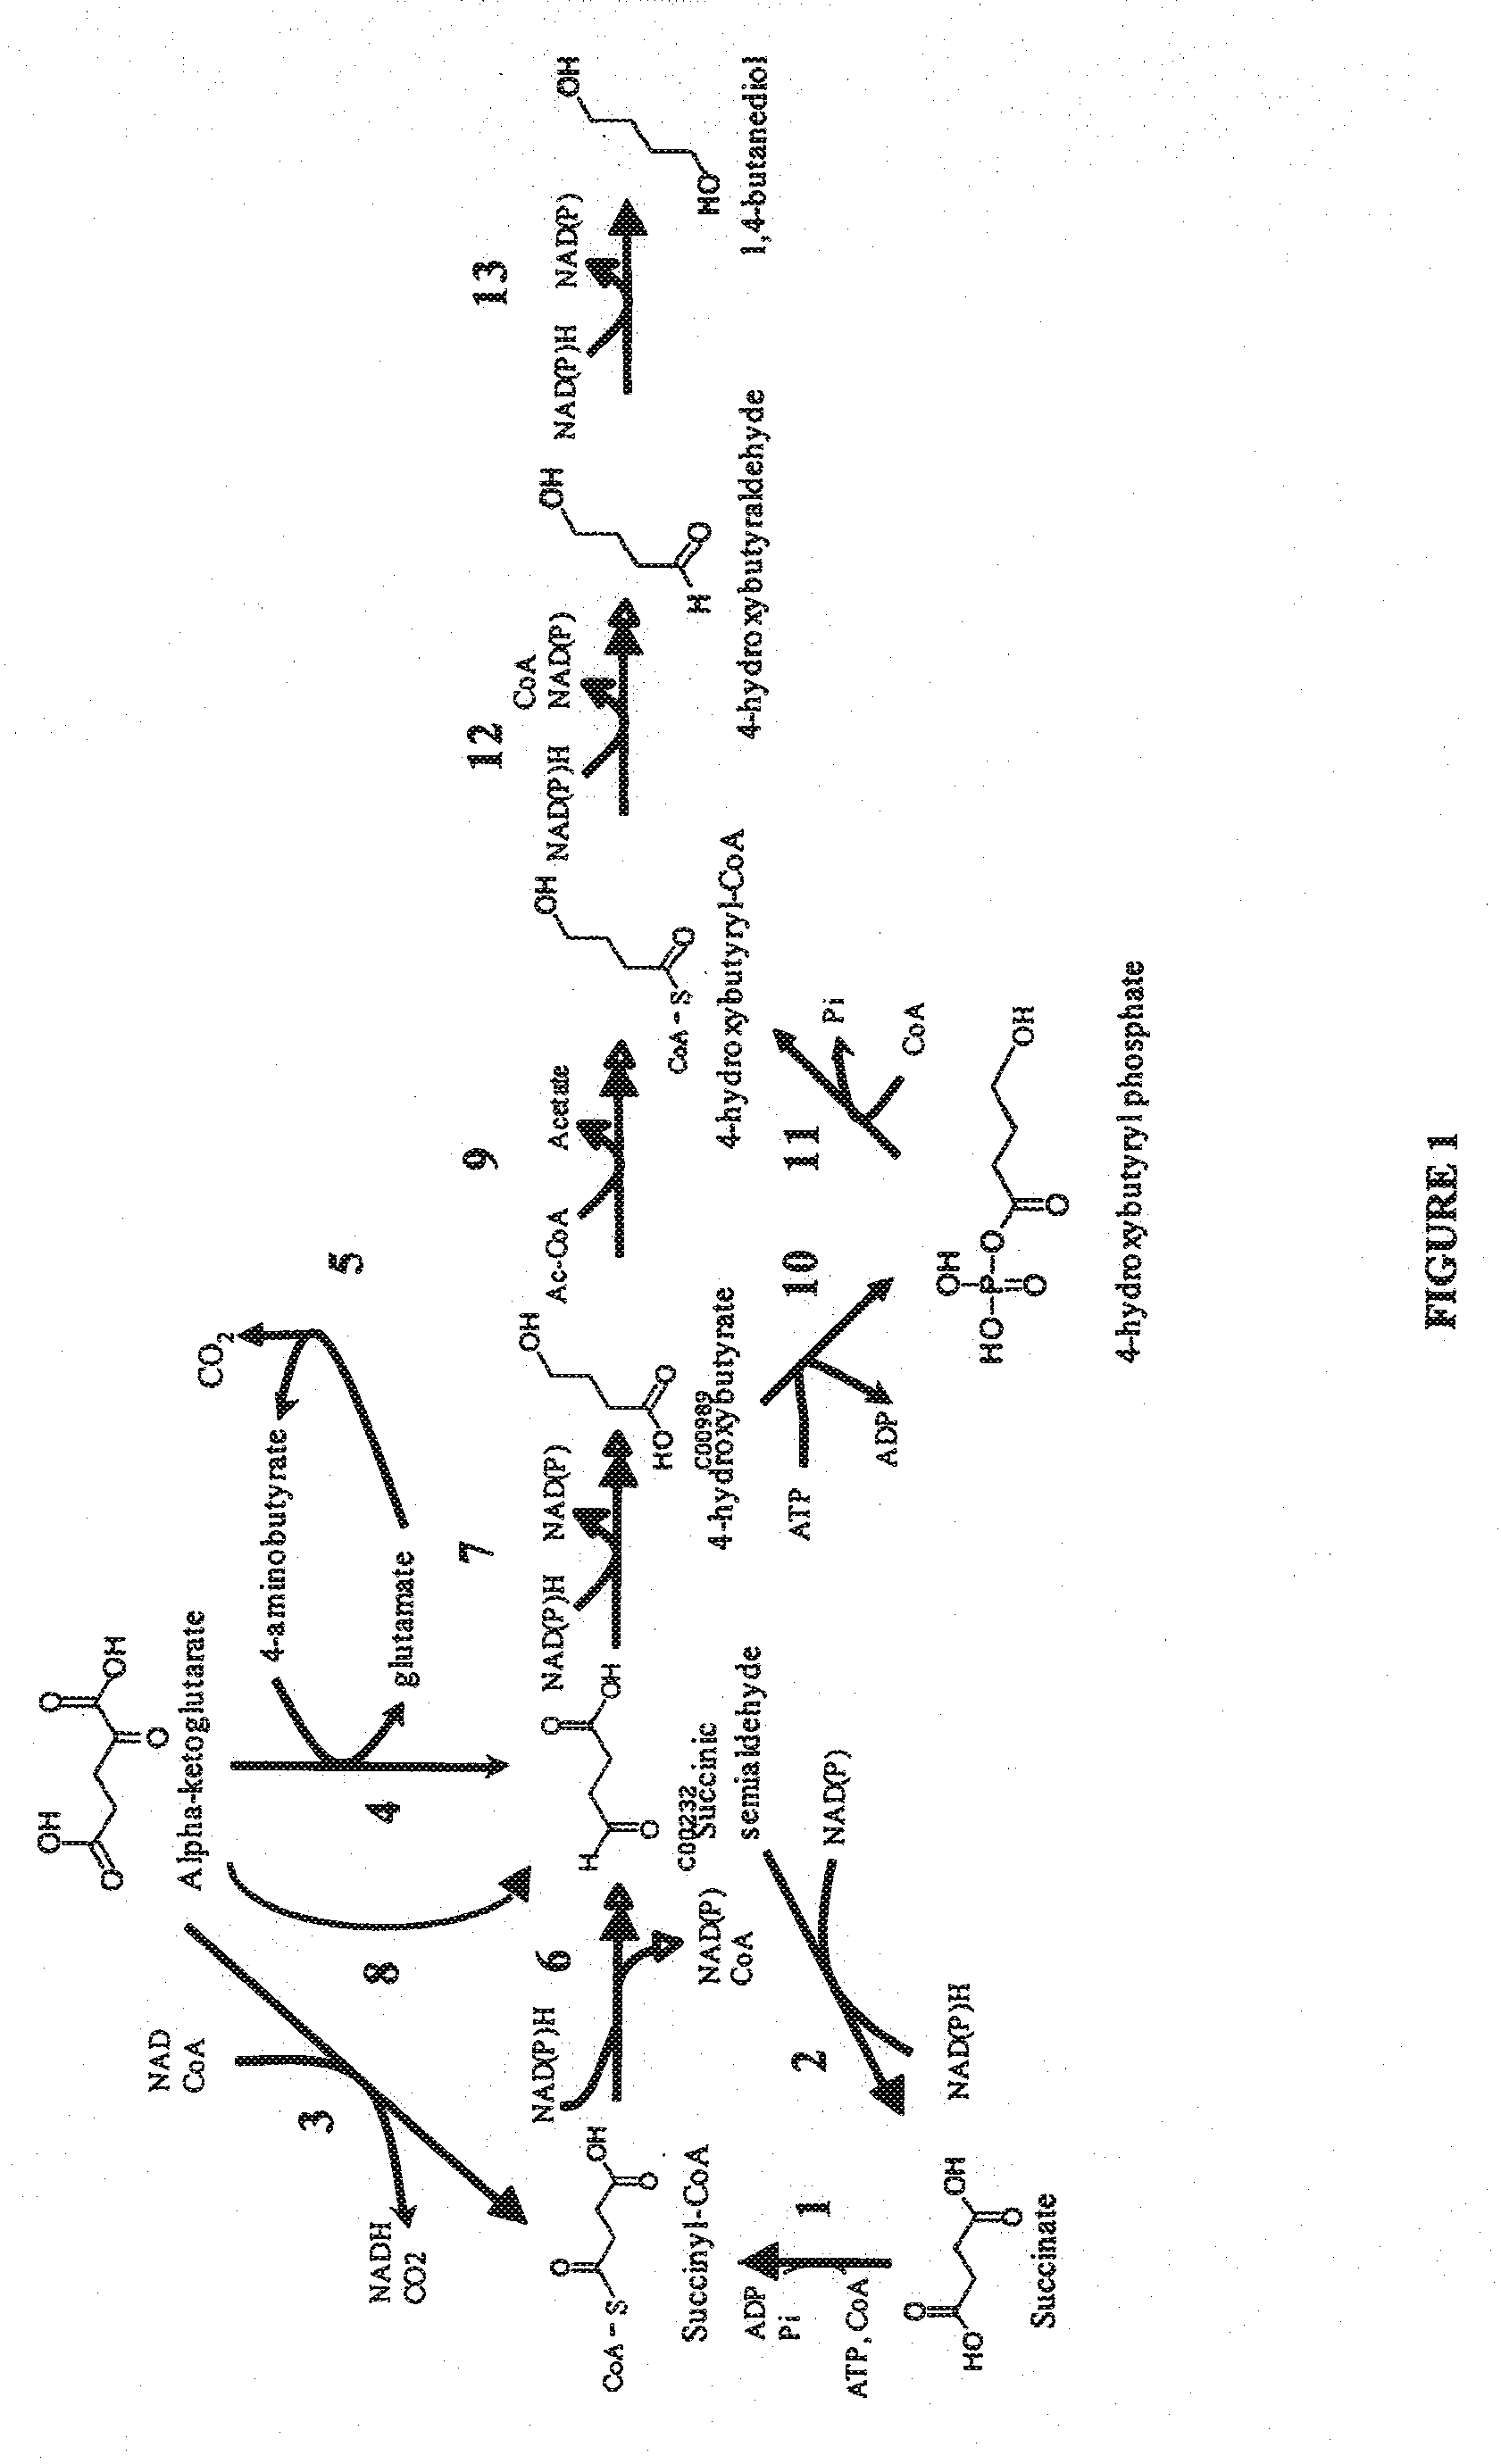 Microorganisms for the production of 1,4-butanediol